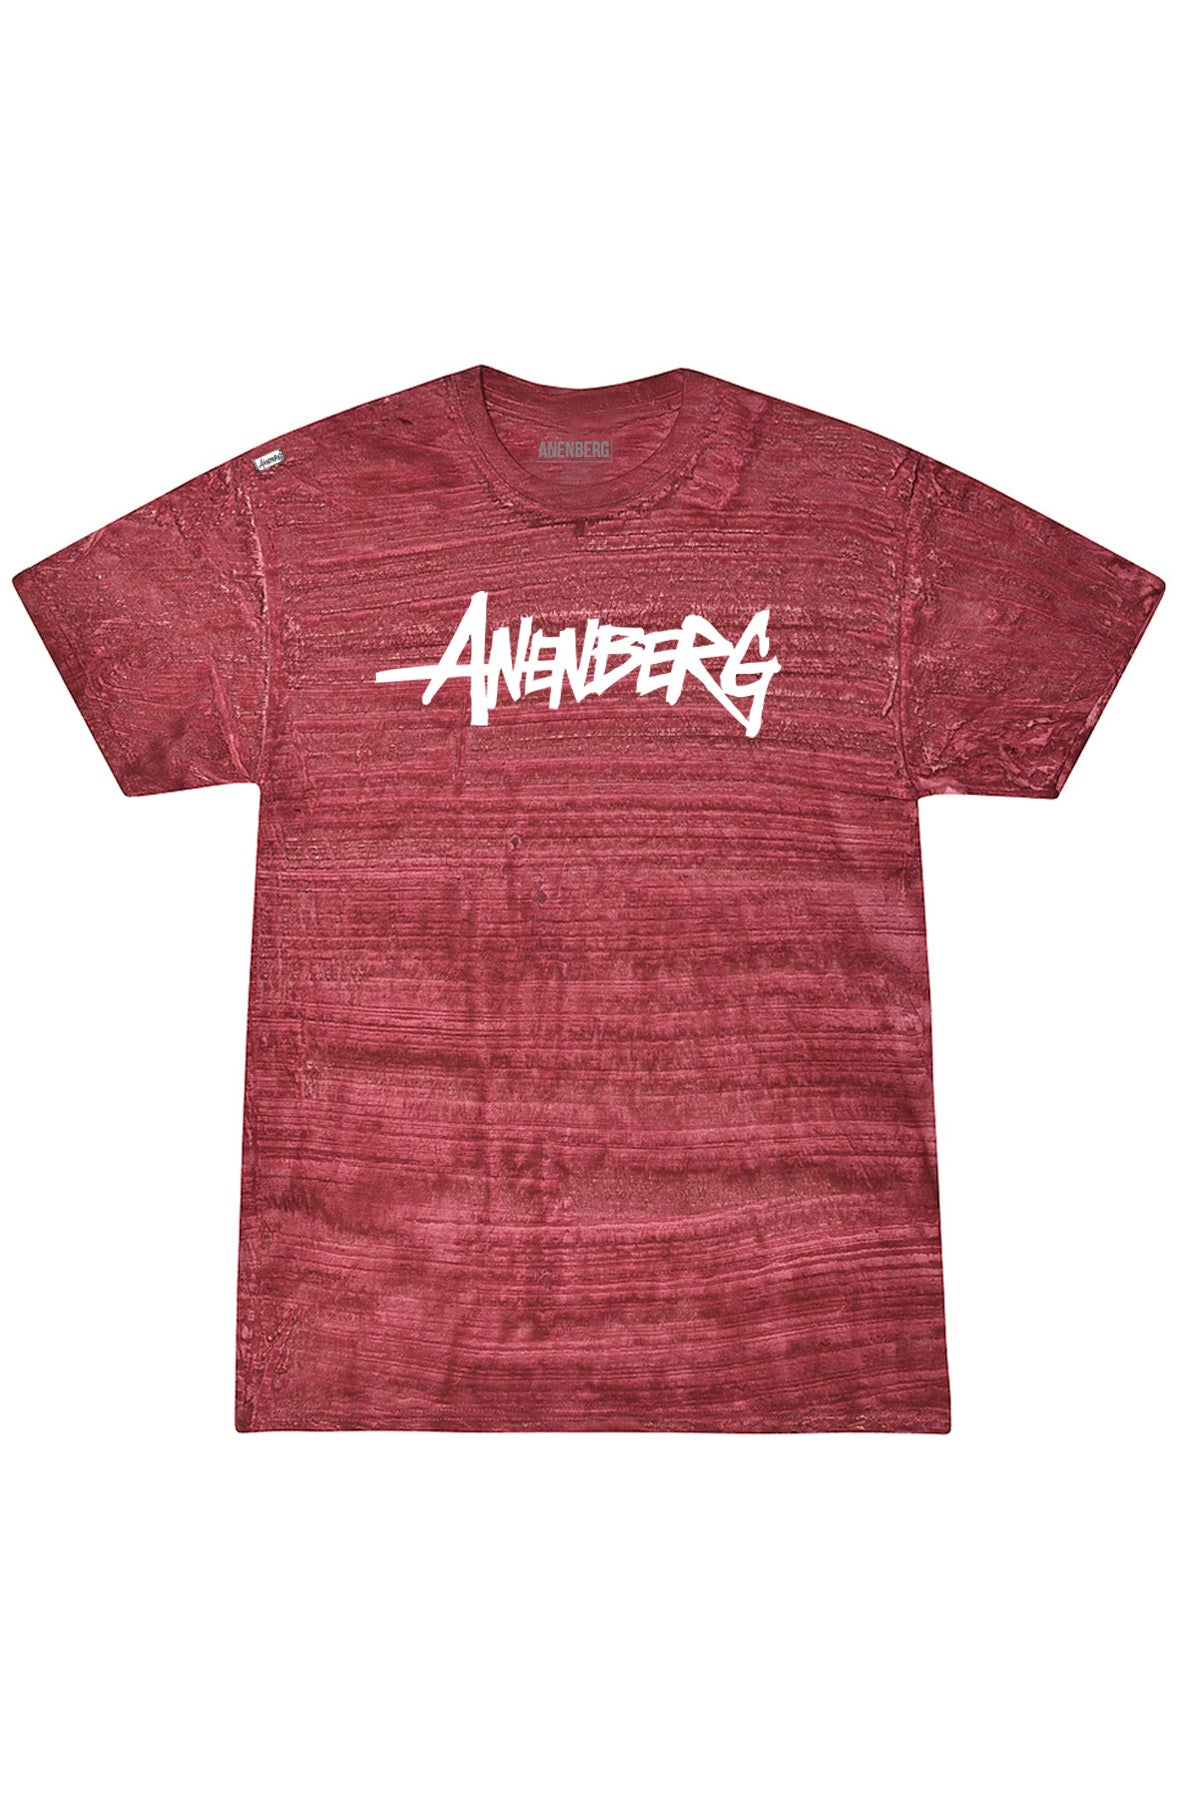 Anenberg, Single Story American Made Mens Red Crew Neck Tee Shirt